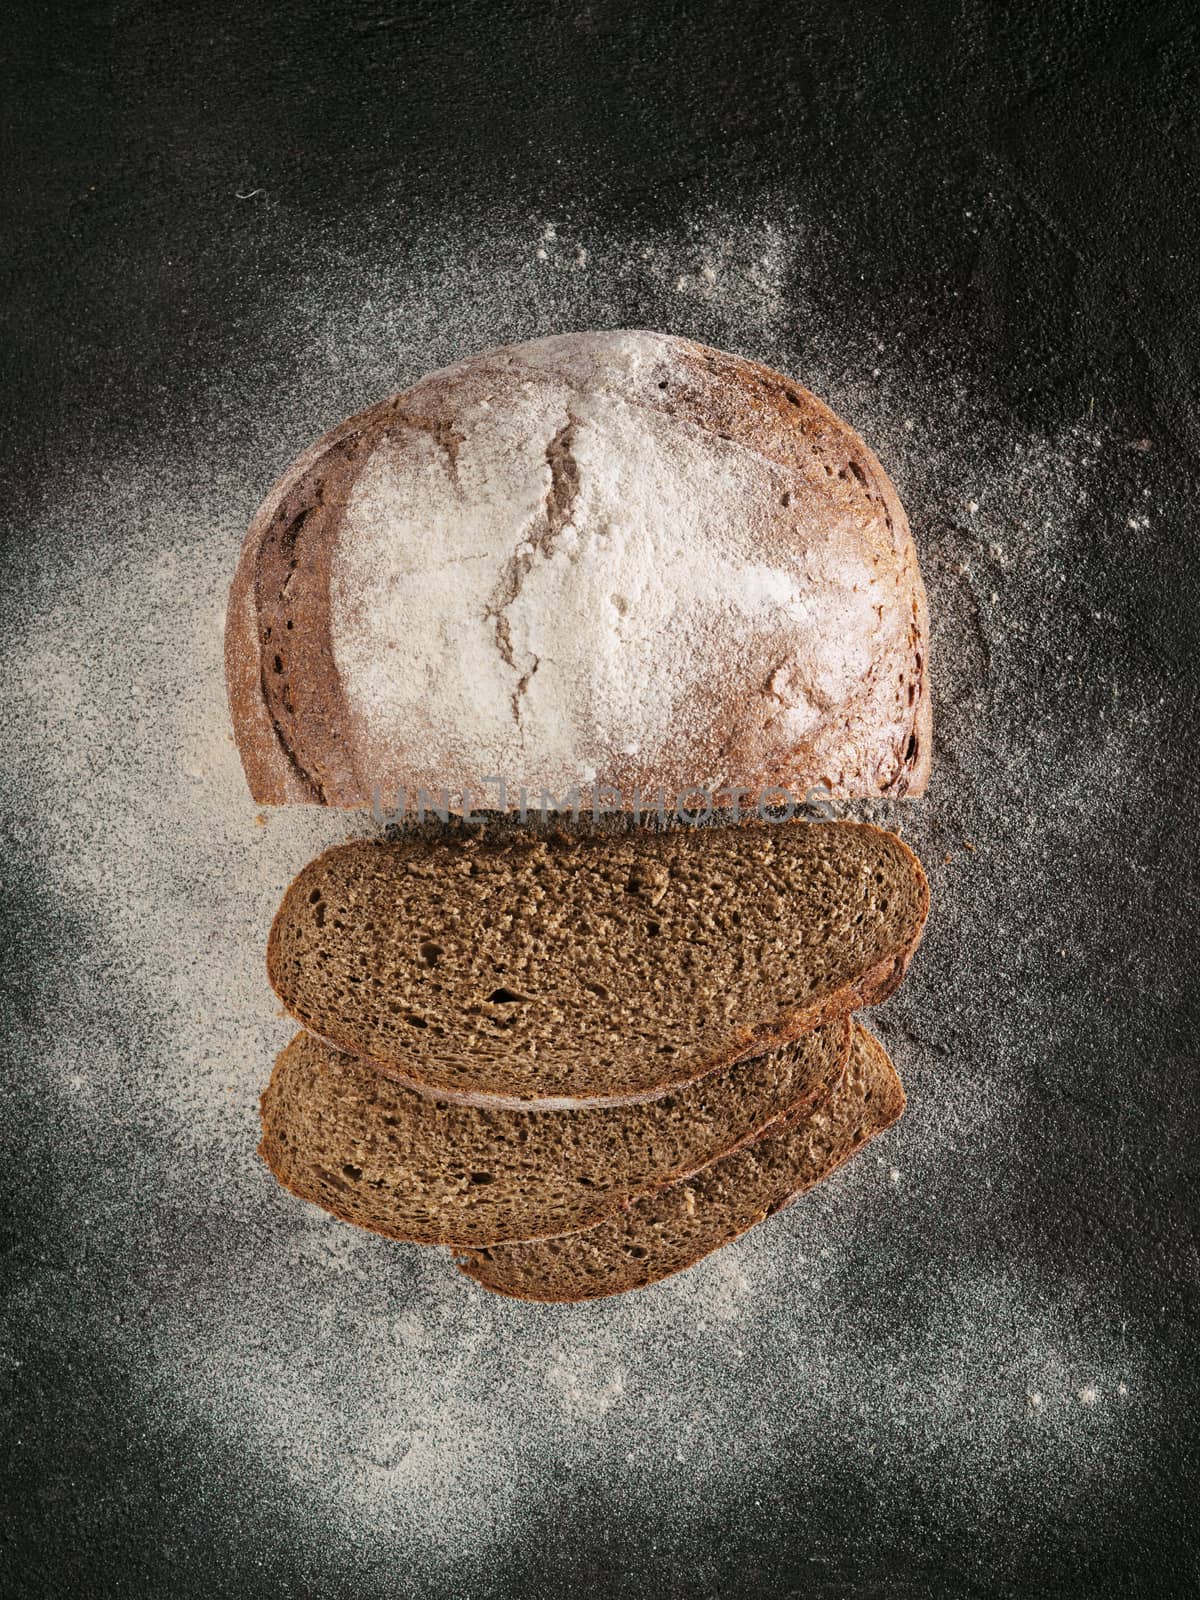 Sliced homemade sourdough rye bread with rye flour on black textured background. Top view or flat-lay. Low key